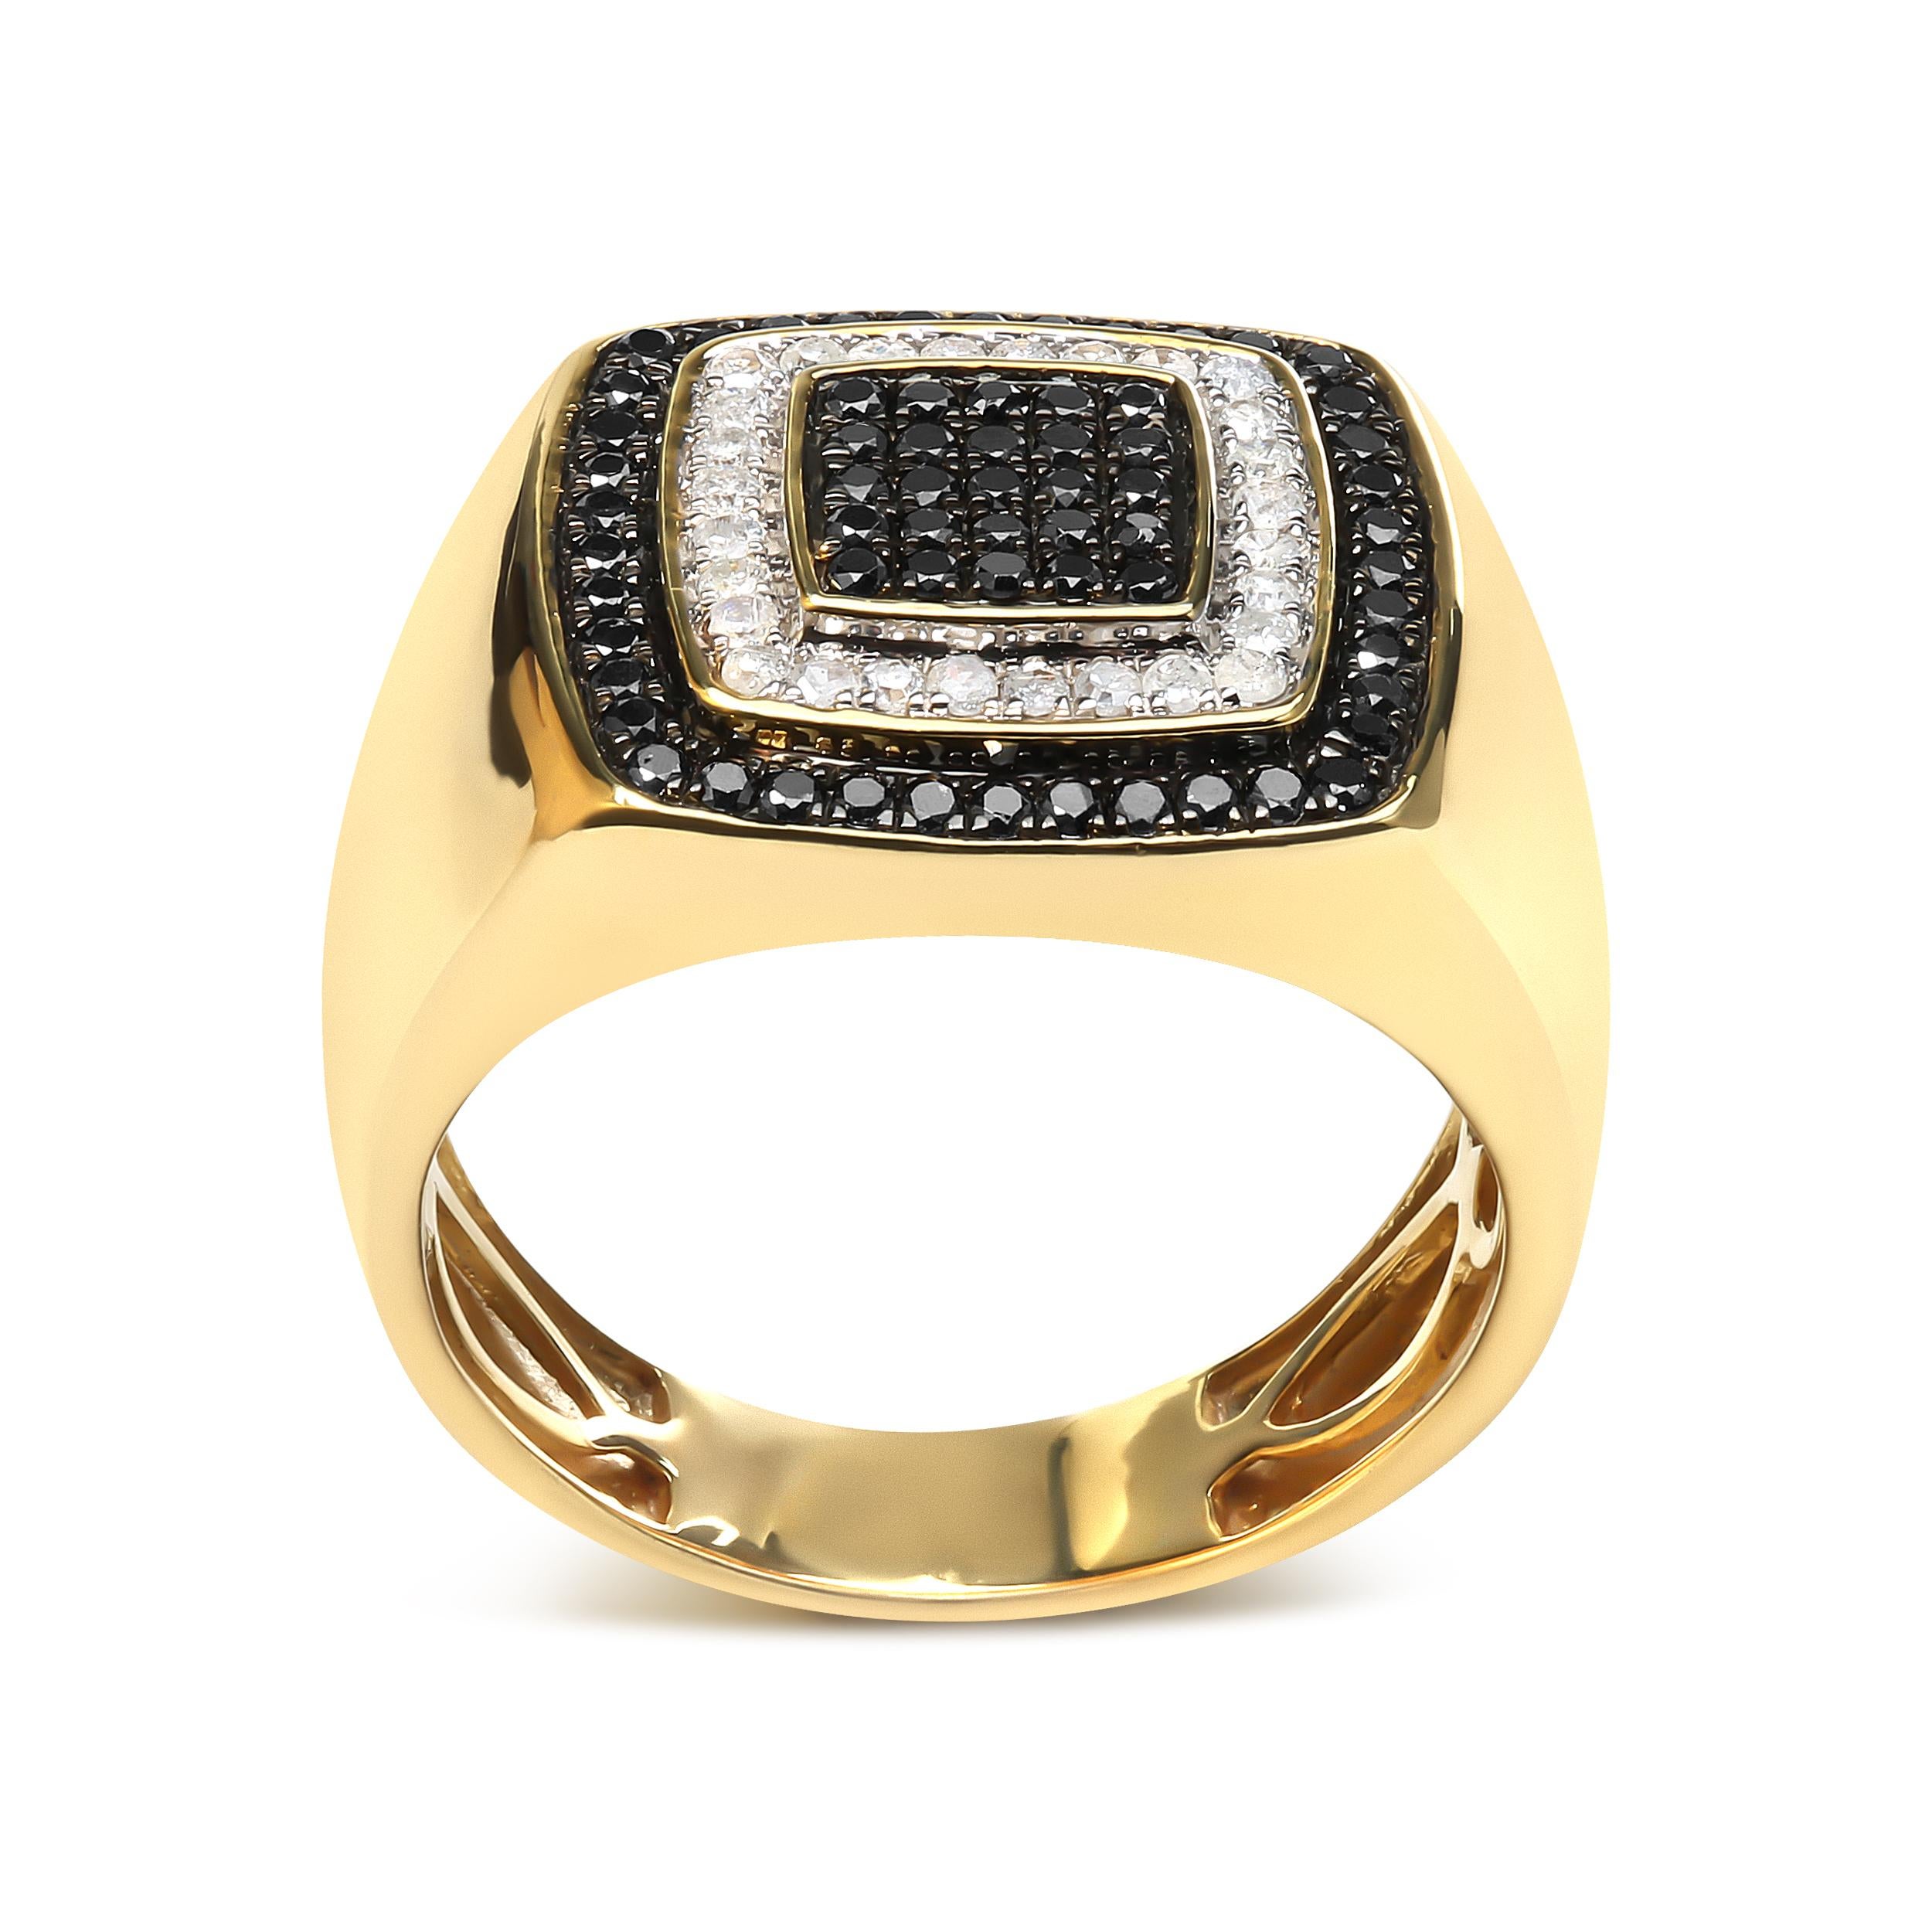 This stunning men's black and white diamond band ring is a true testament to the art of craftsmanship. With 10K yellow gold, this ring boasts a unique design that highlights the 93 natural, round-cut diamonds that total 0.75 carats. The diamonds, in